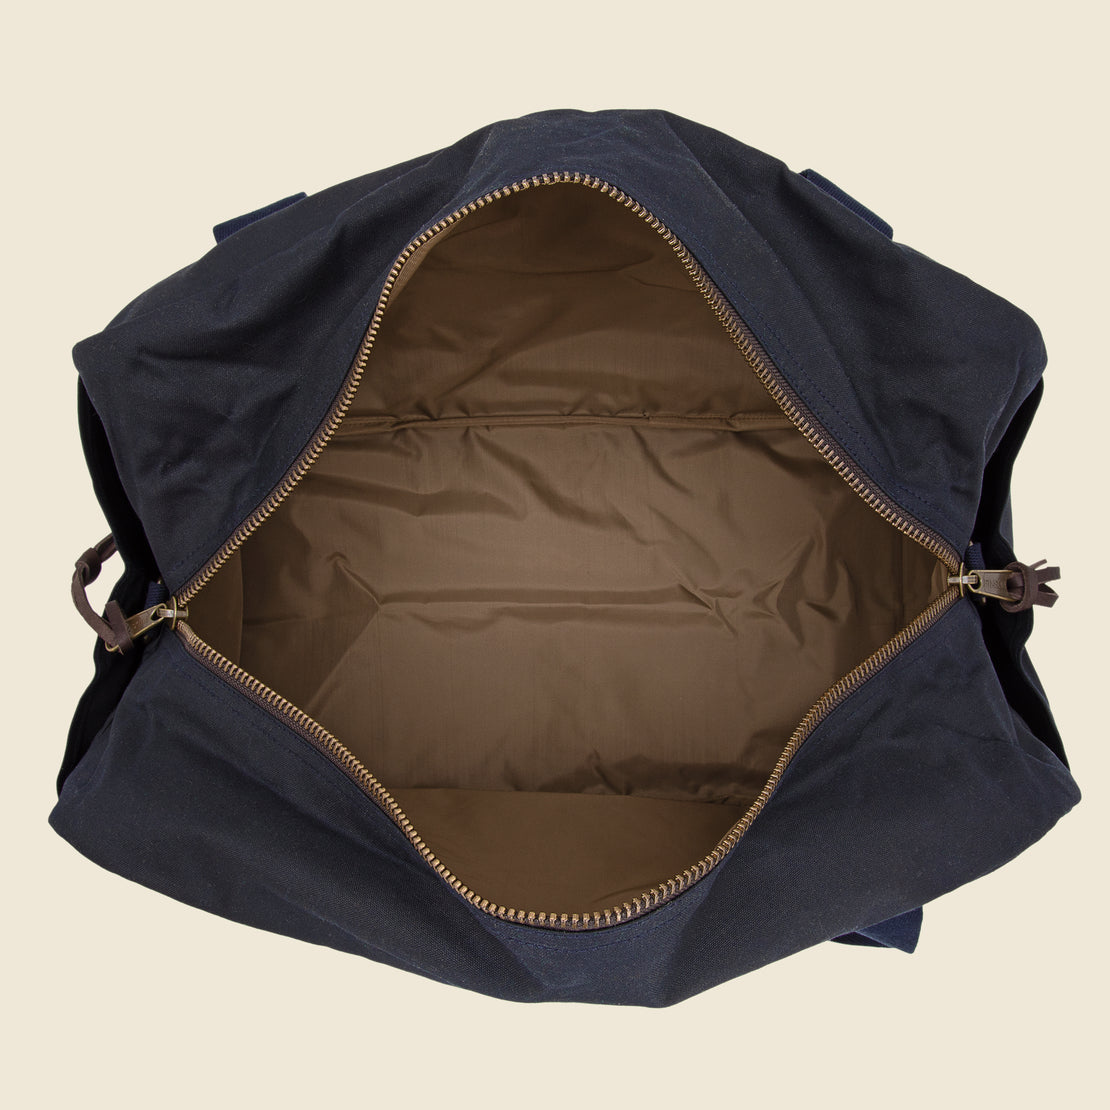 Tin Cloth Medium Duffle Bag - Navy - Filson - STAG Provisions - Accessories - Bags / Luggage